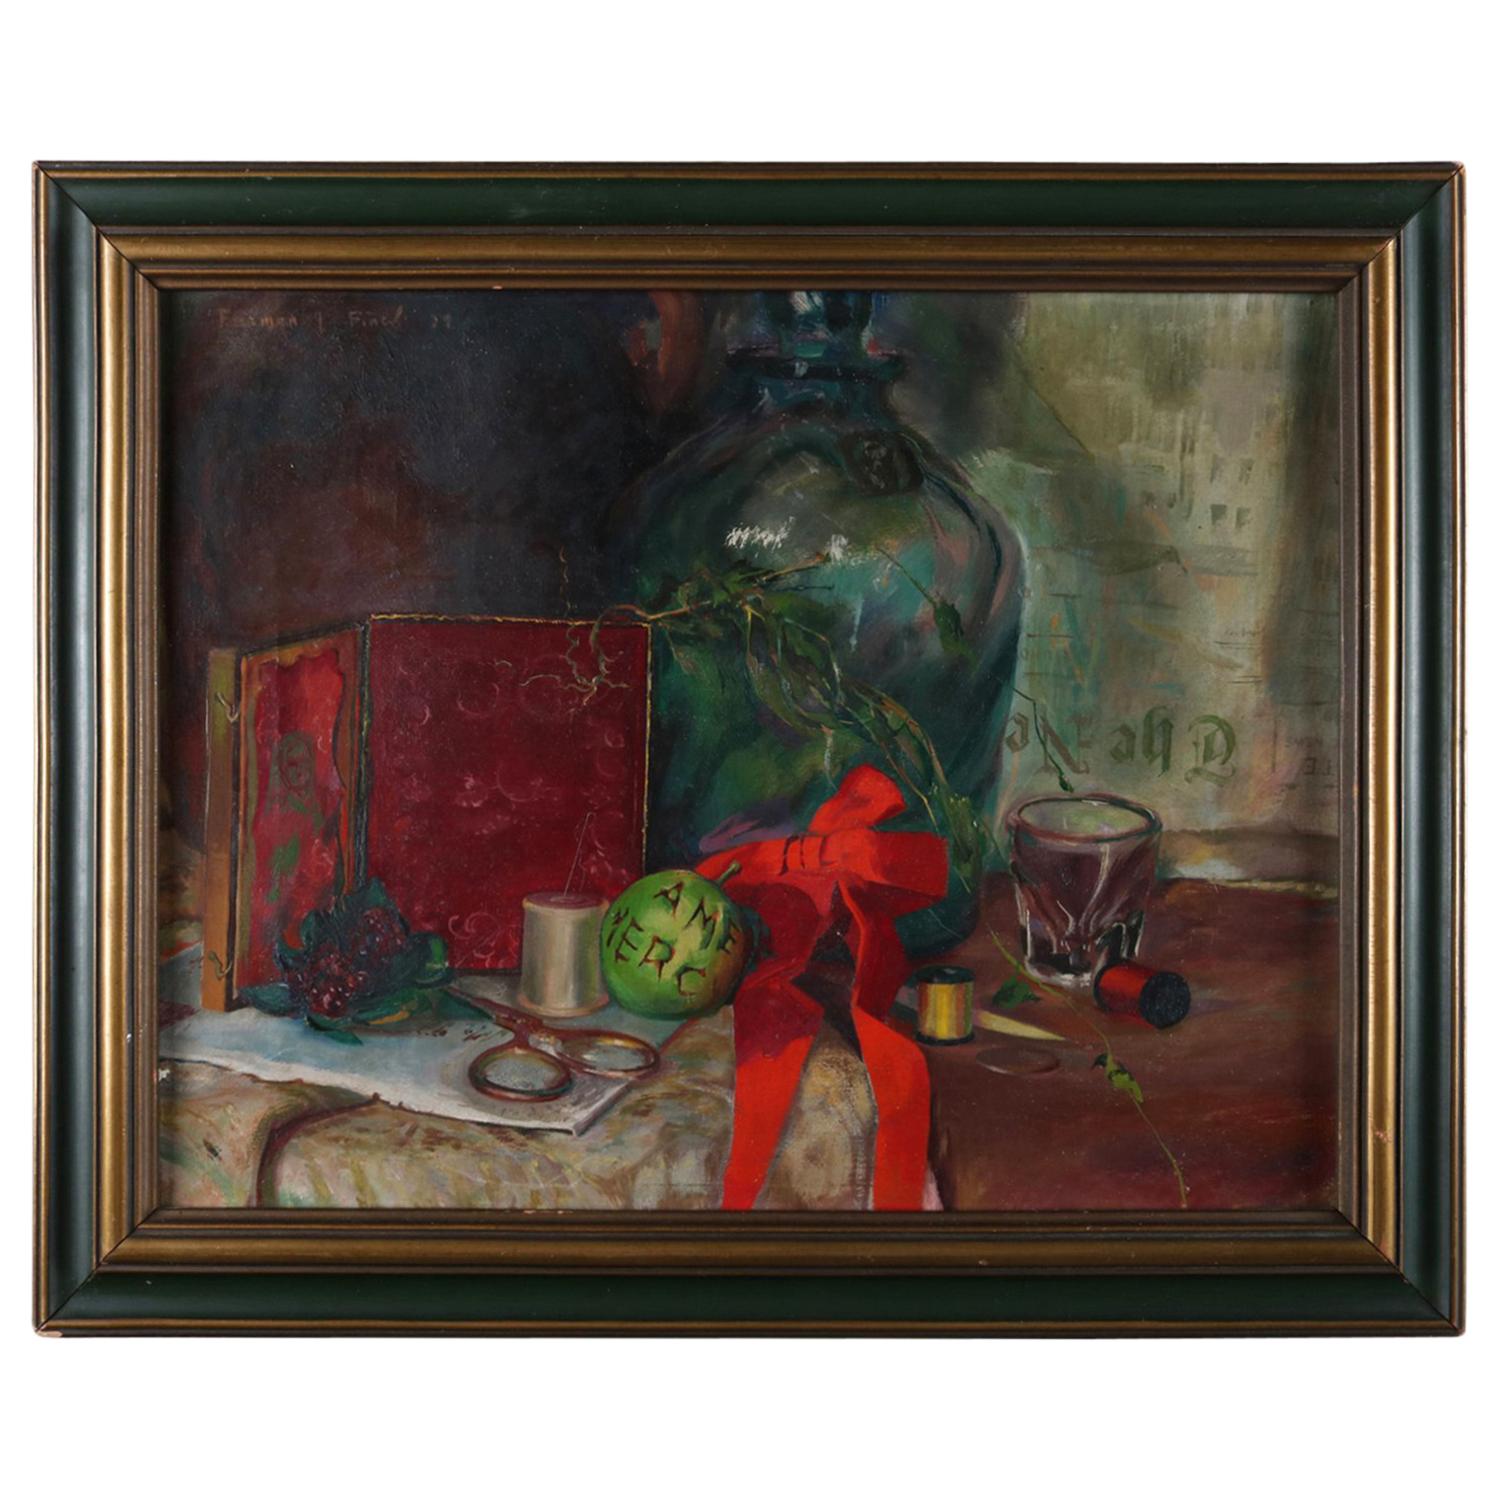 Oil on Canvas Still Life Painting "Ame Mercy" by Furman J. Finck, circa 1939